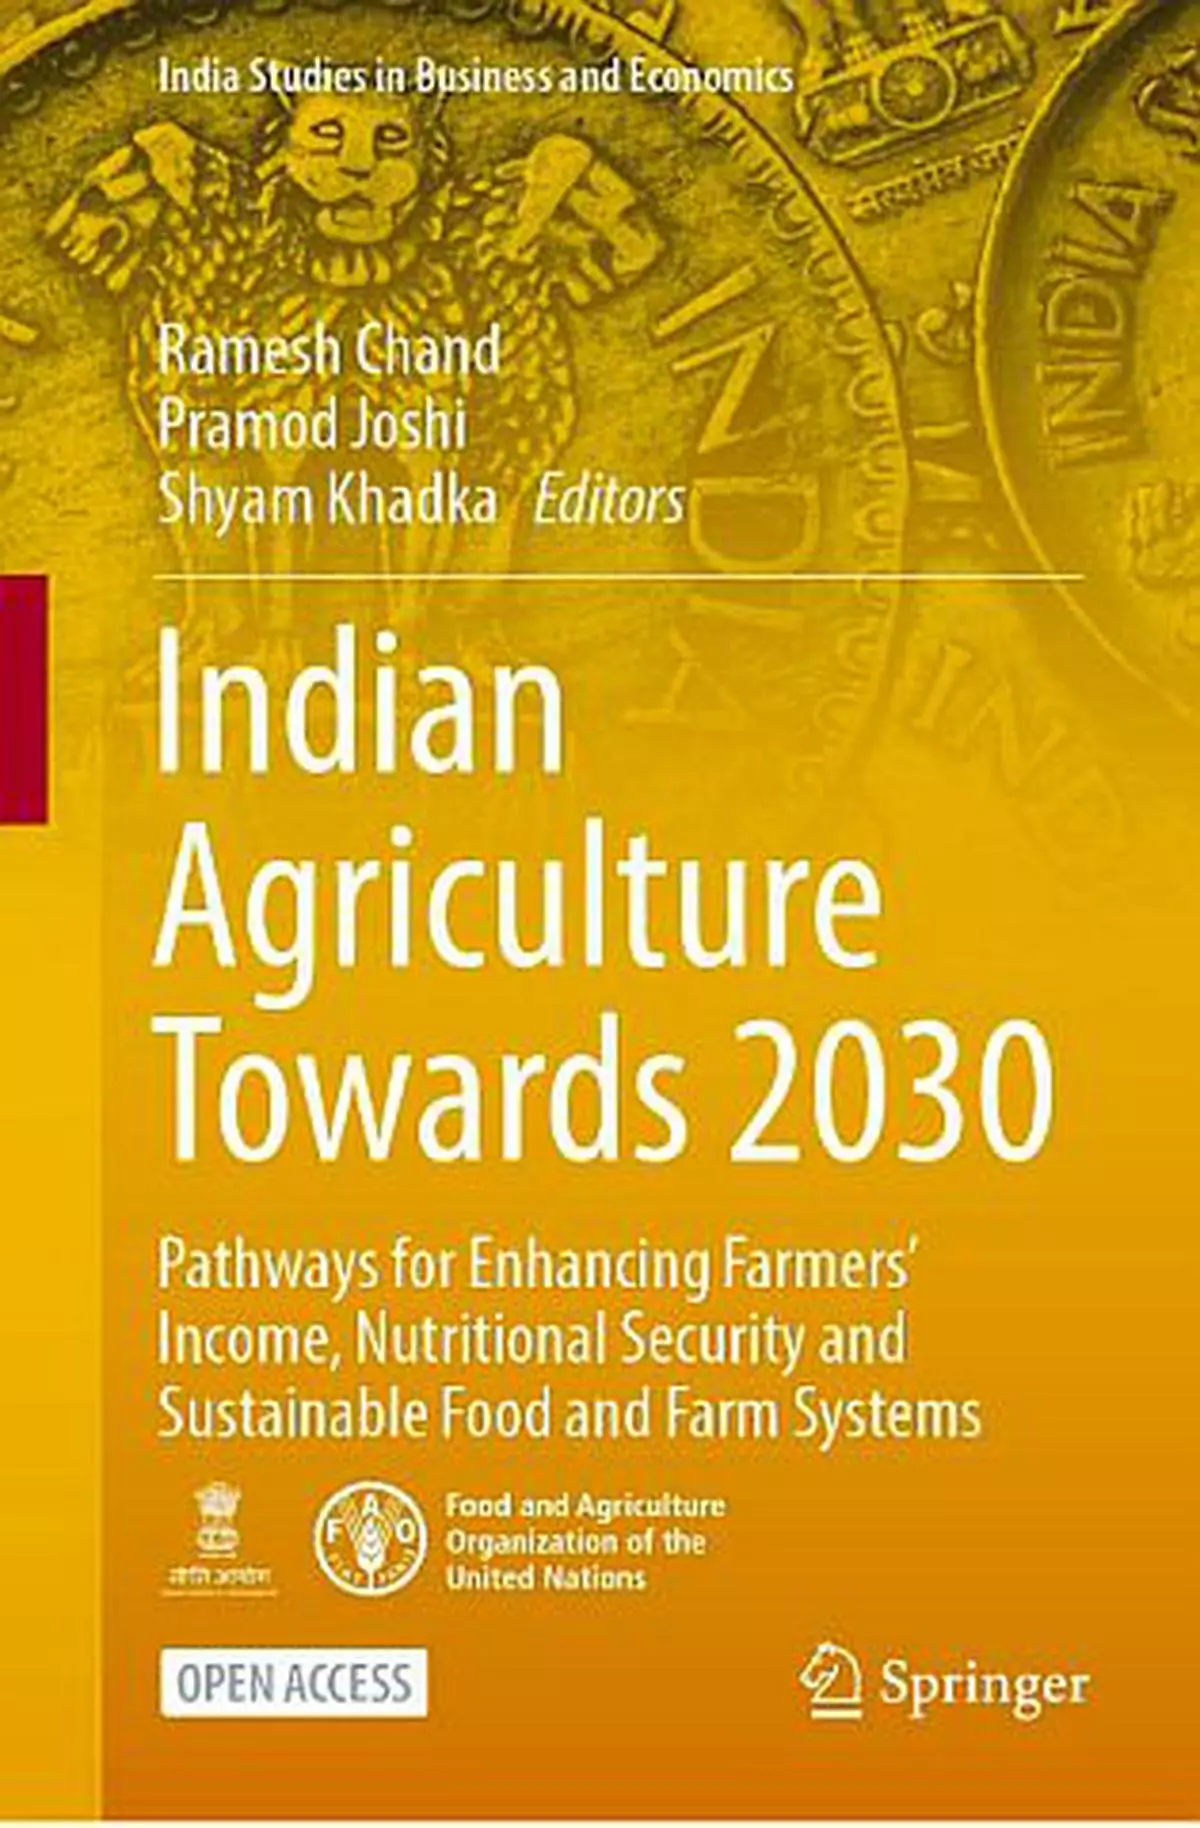 Indian Agriculture Towards 2030: Pathways for Enhancing Farmers’ Income, Nutritional Security and Sustainable Food and Farm Systems (India Studies in Business and Economics) 
by Ramesh Chand (Editor), Pramod Joshi (Editor), Shyam Khadka (Editor) 